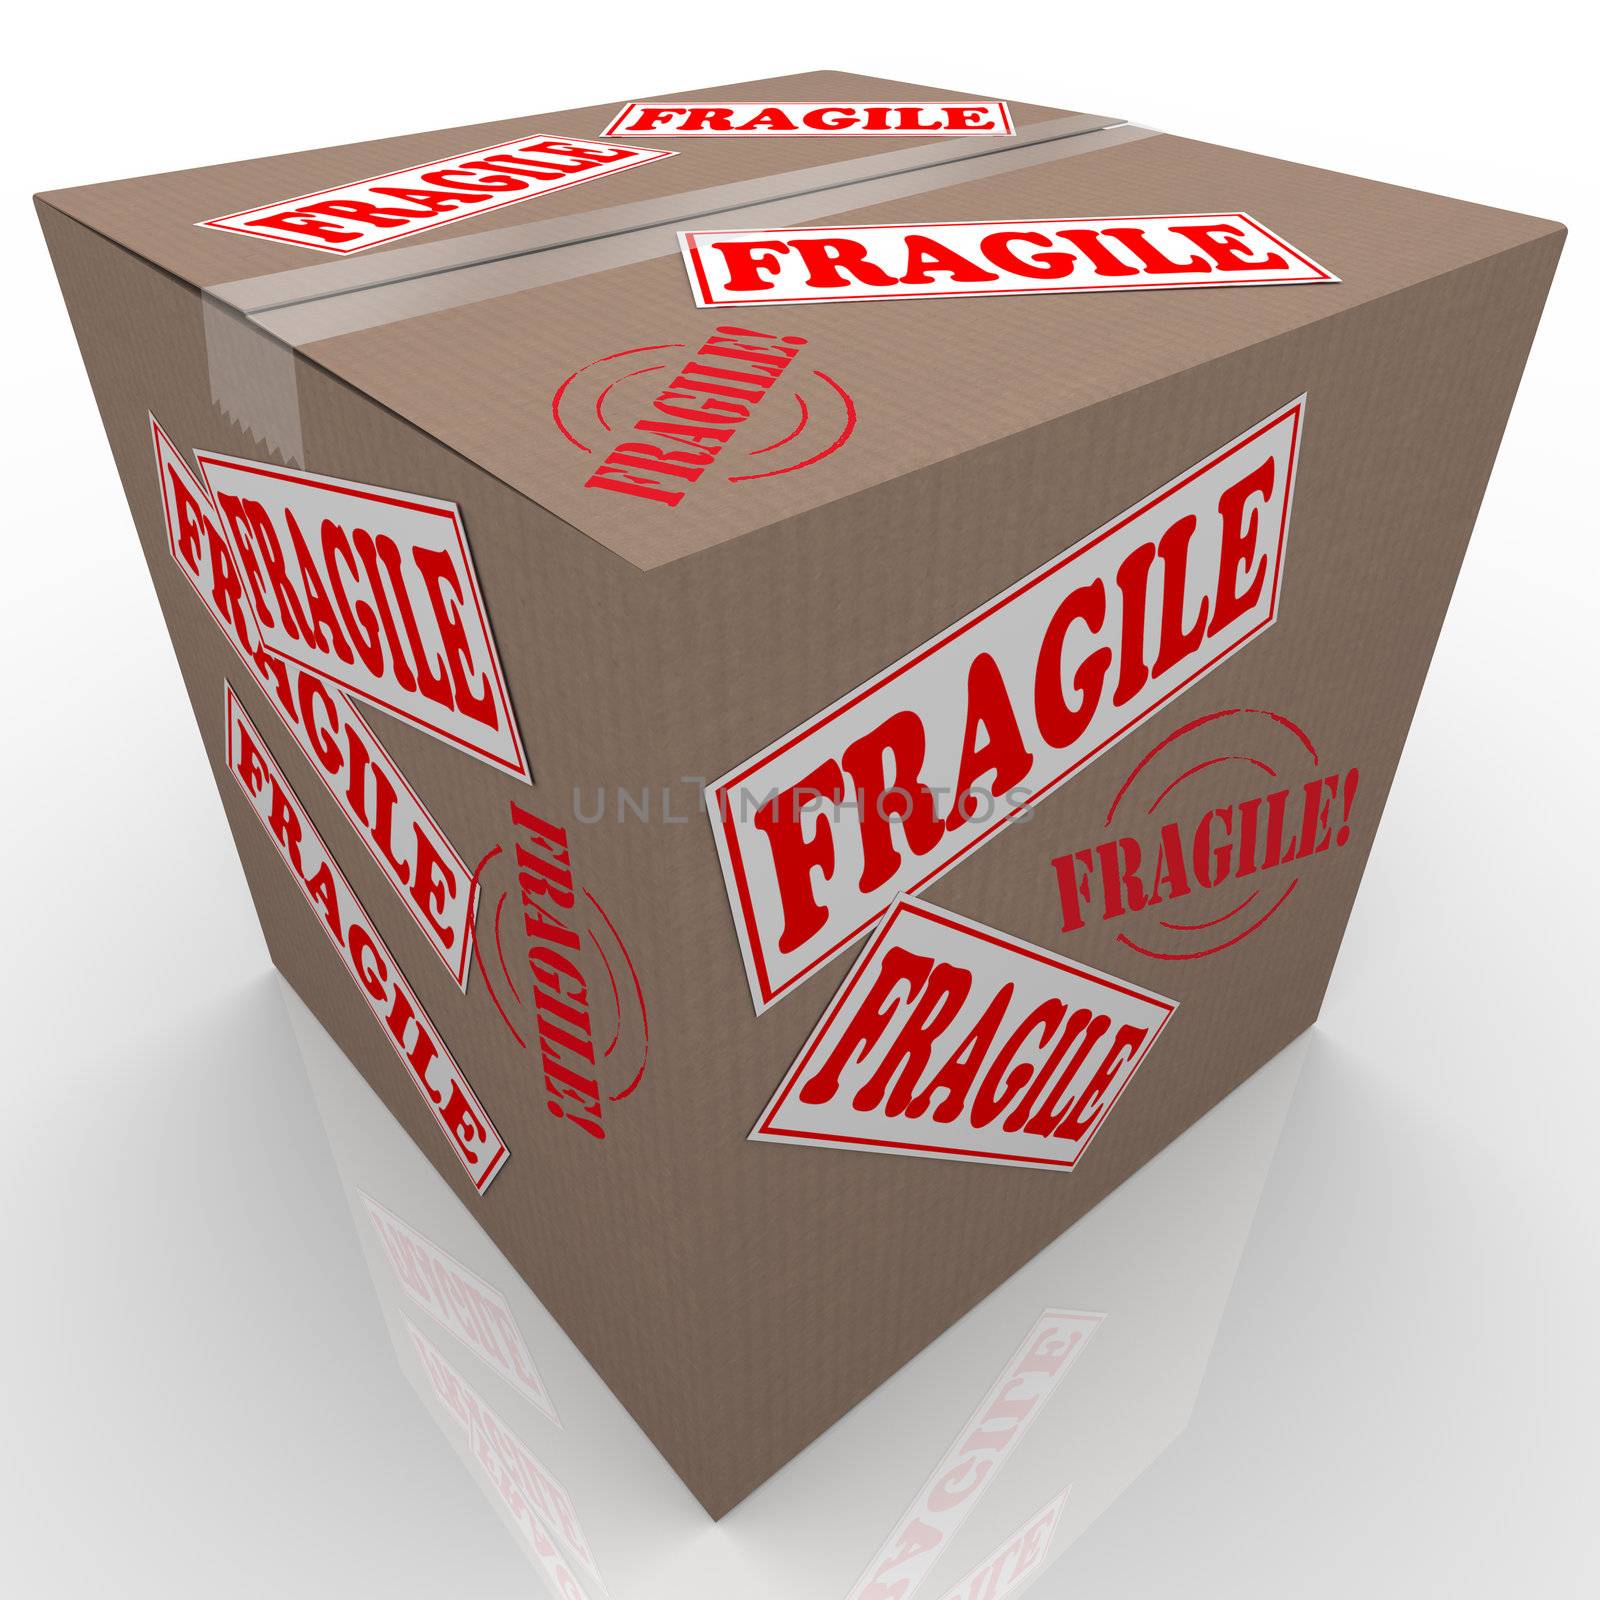 A cardboard box used to ship goods or items with stickers all over it marked Fragile telling the handler or delivery service to handle the package with care